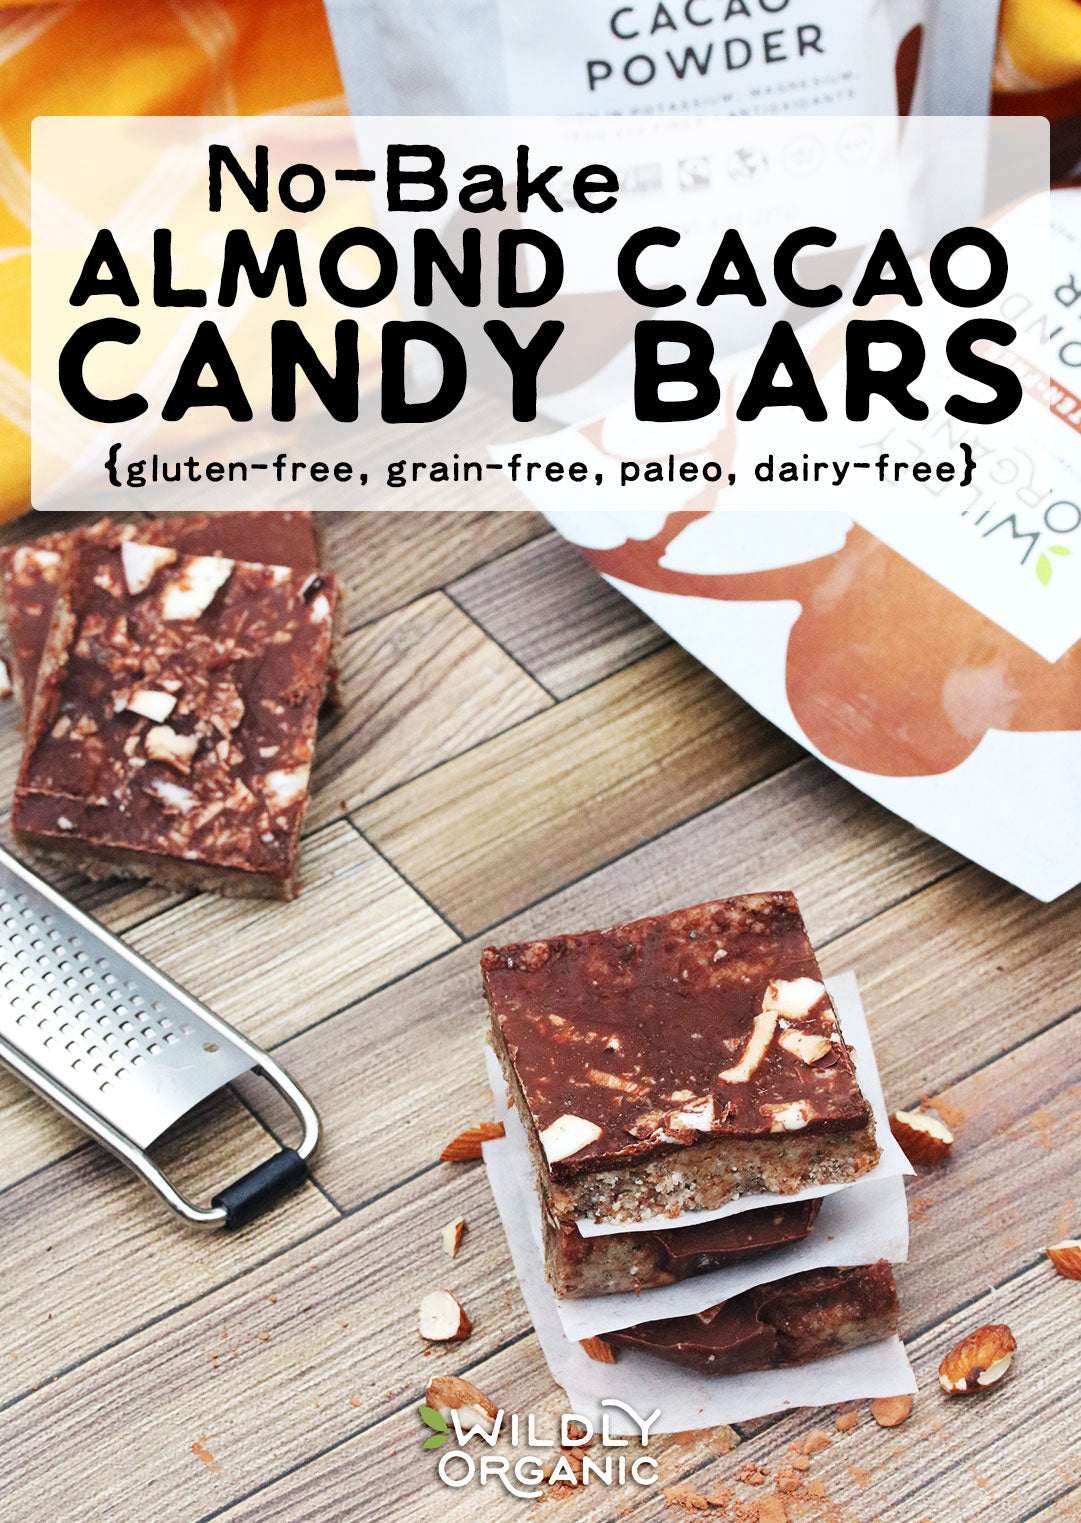 Photo of No-Bake Almond Cacao Candy Bars | These no-bake almond cacao candy bars are simple to whip up and have the flavor of a classic candy bar. Instead of giving yourself a sugar high, they’re made with natural sugars and real food ingredients which will help you stay filled and fueled. #glutenfree #grainfree #chocolate #paleo #dairyfree #realfood #allergyfriendly